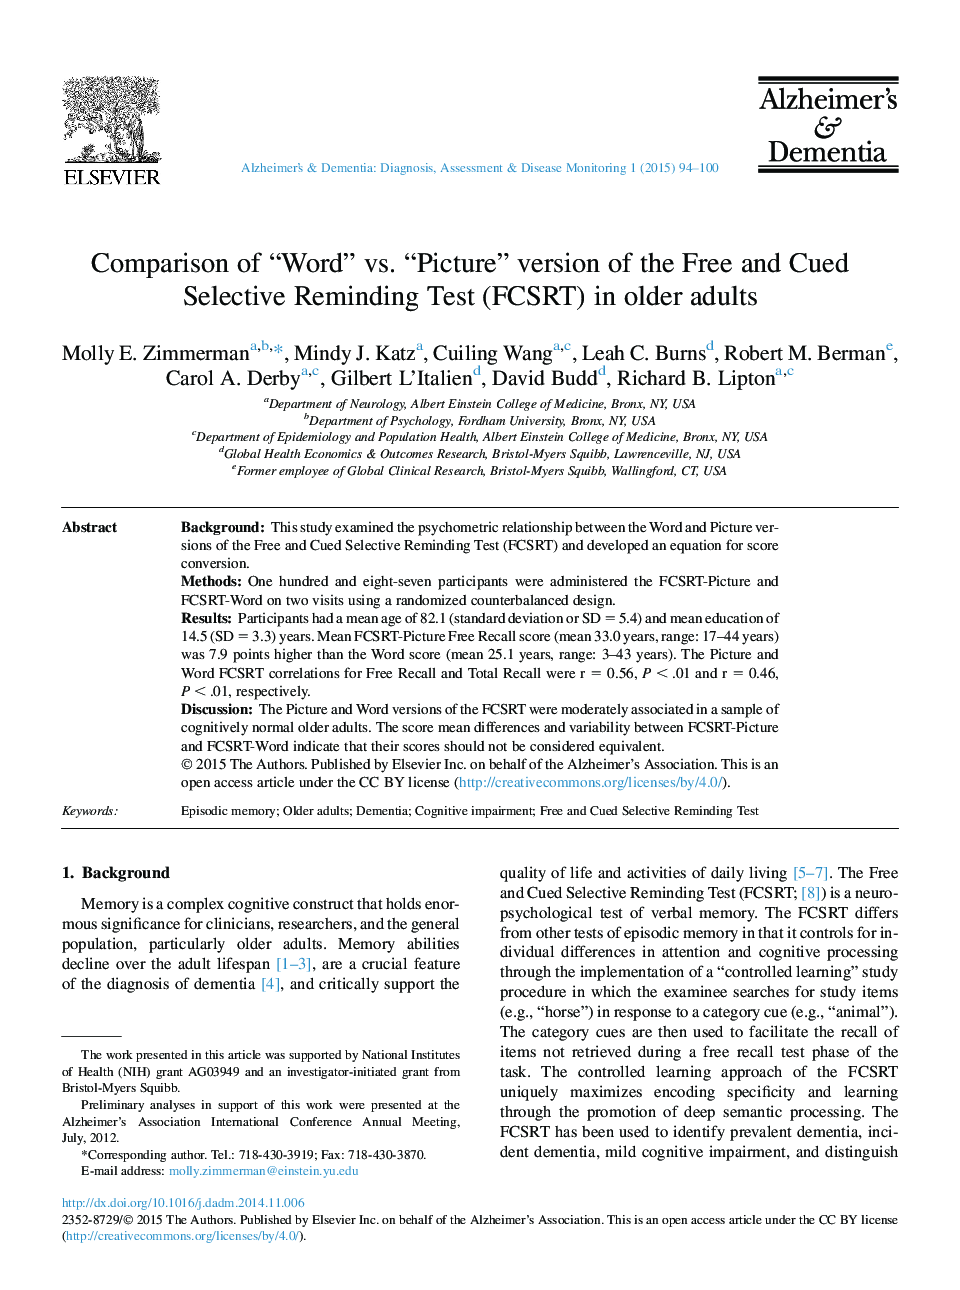 Comparison of “Word” vs. “Picture” version of the Free and Cued Selective Reminding Test (FCSRT) in older adults 